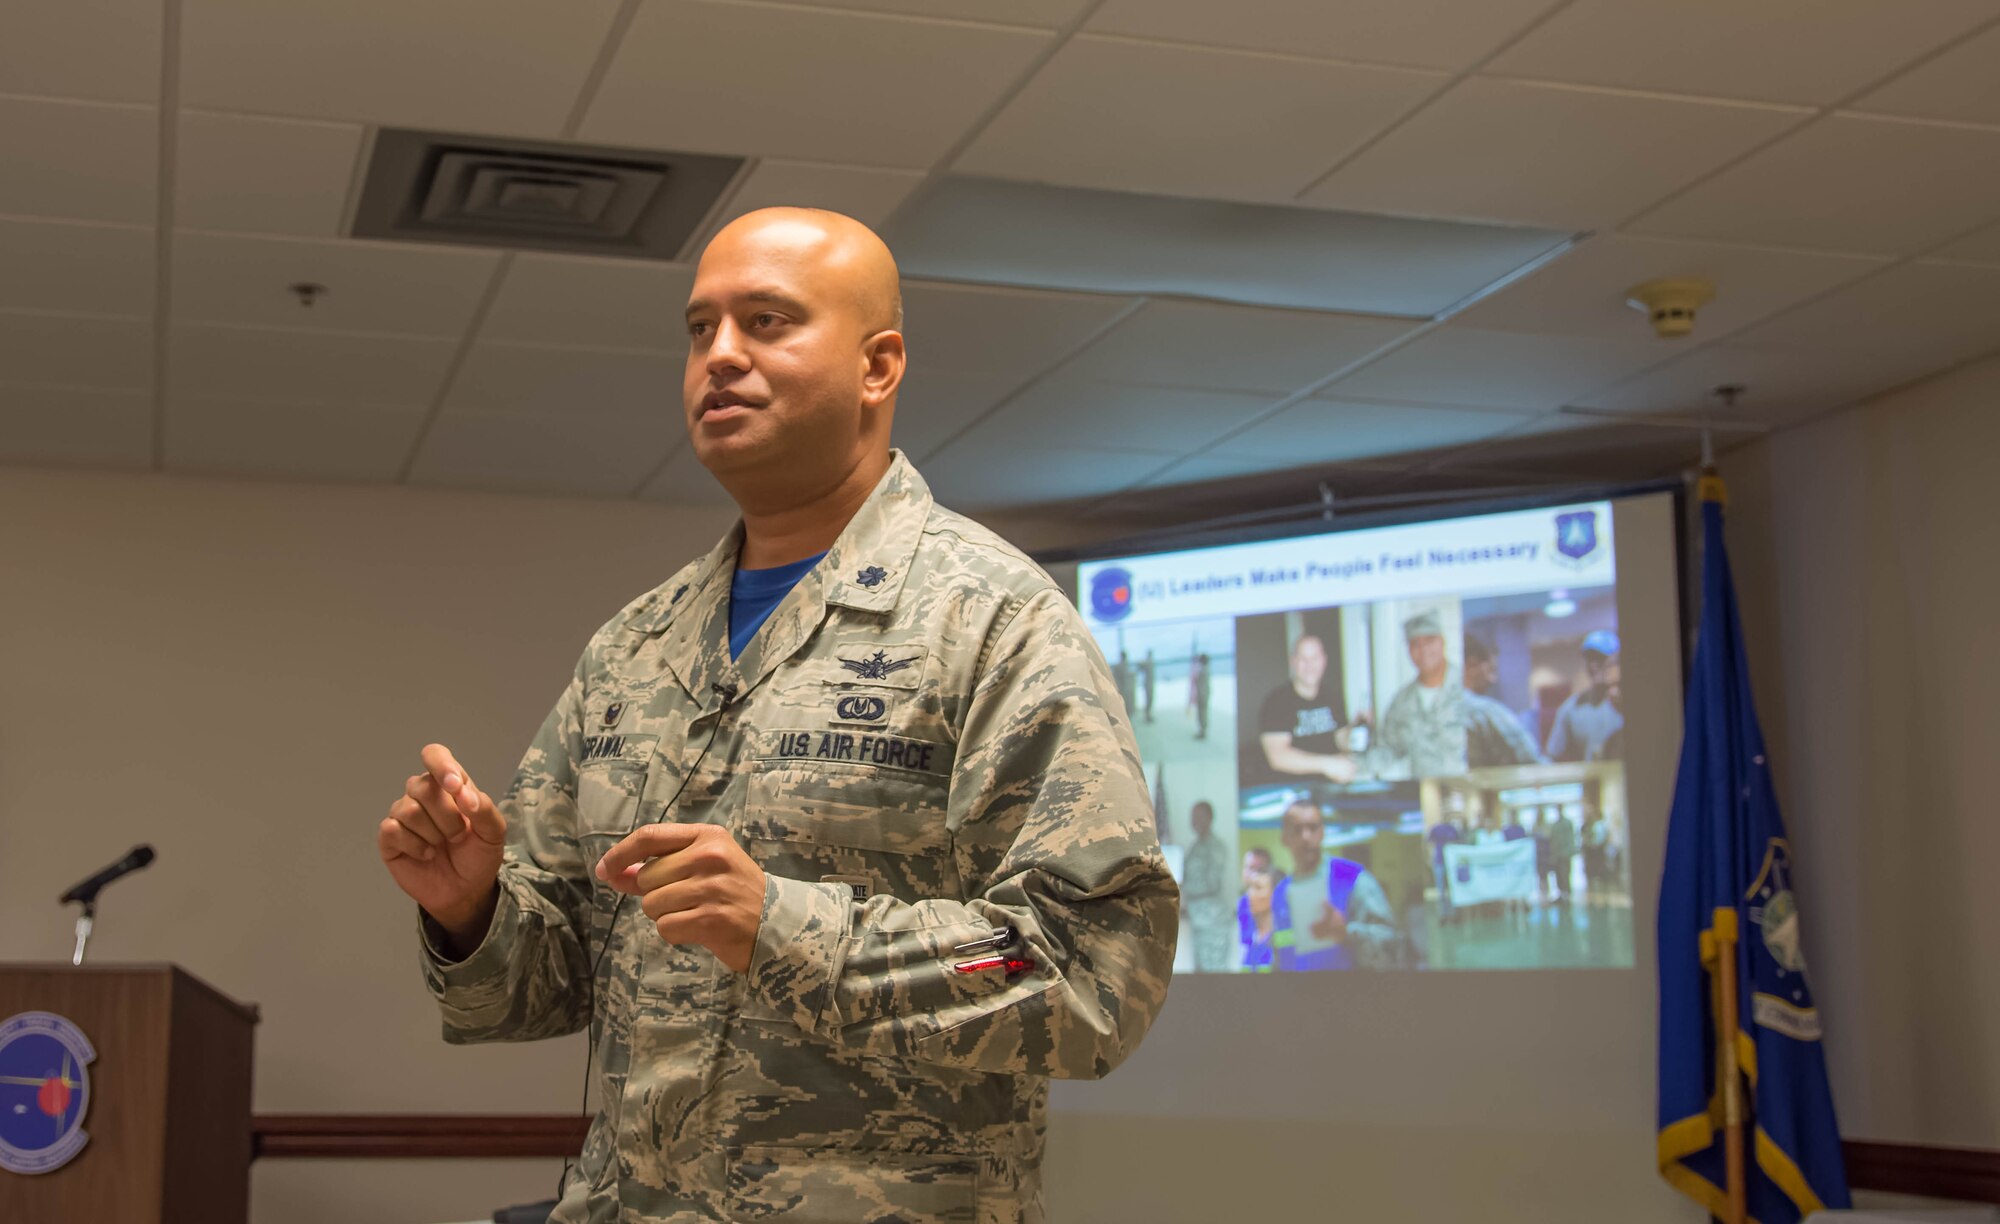 Lieutenant Colonel Raj Agrawal, 20th Space Control Squadron commander and guest speaker, briefs leadership principles and the 20th SPCS mission at the Walton County Chamber of Commerce First Friday Breakfast.